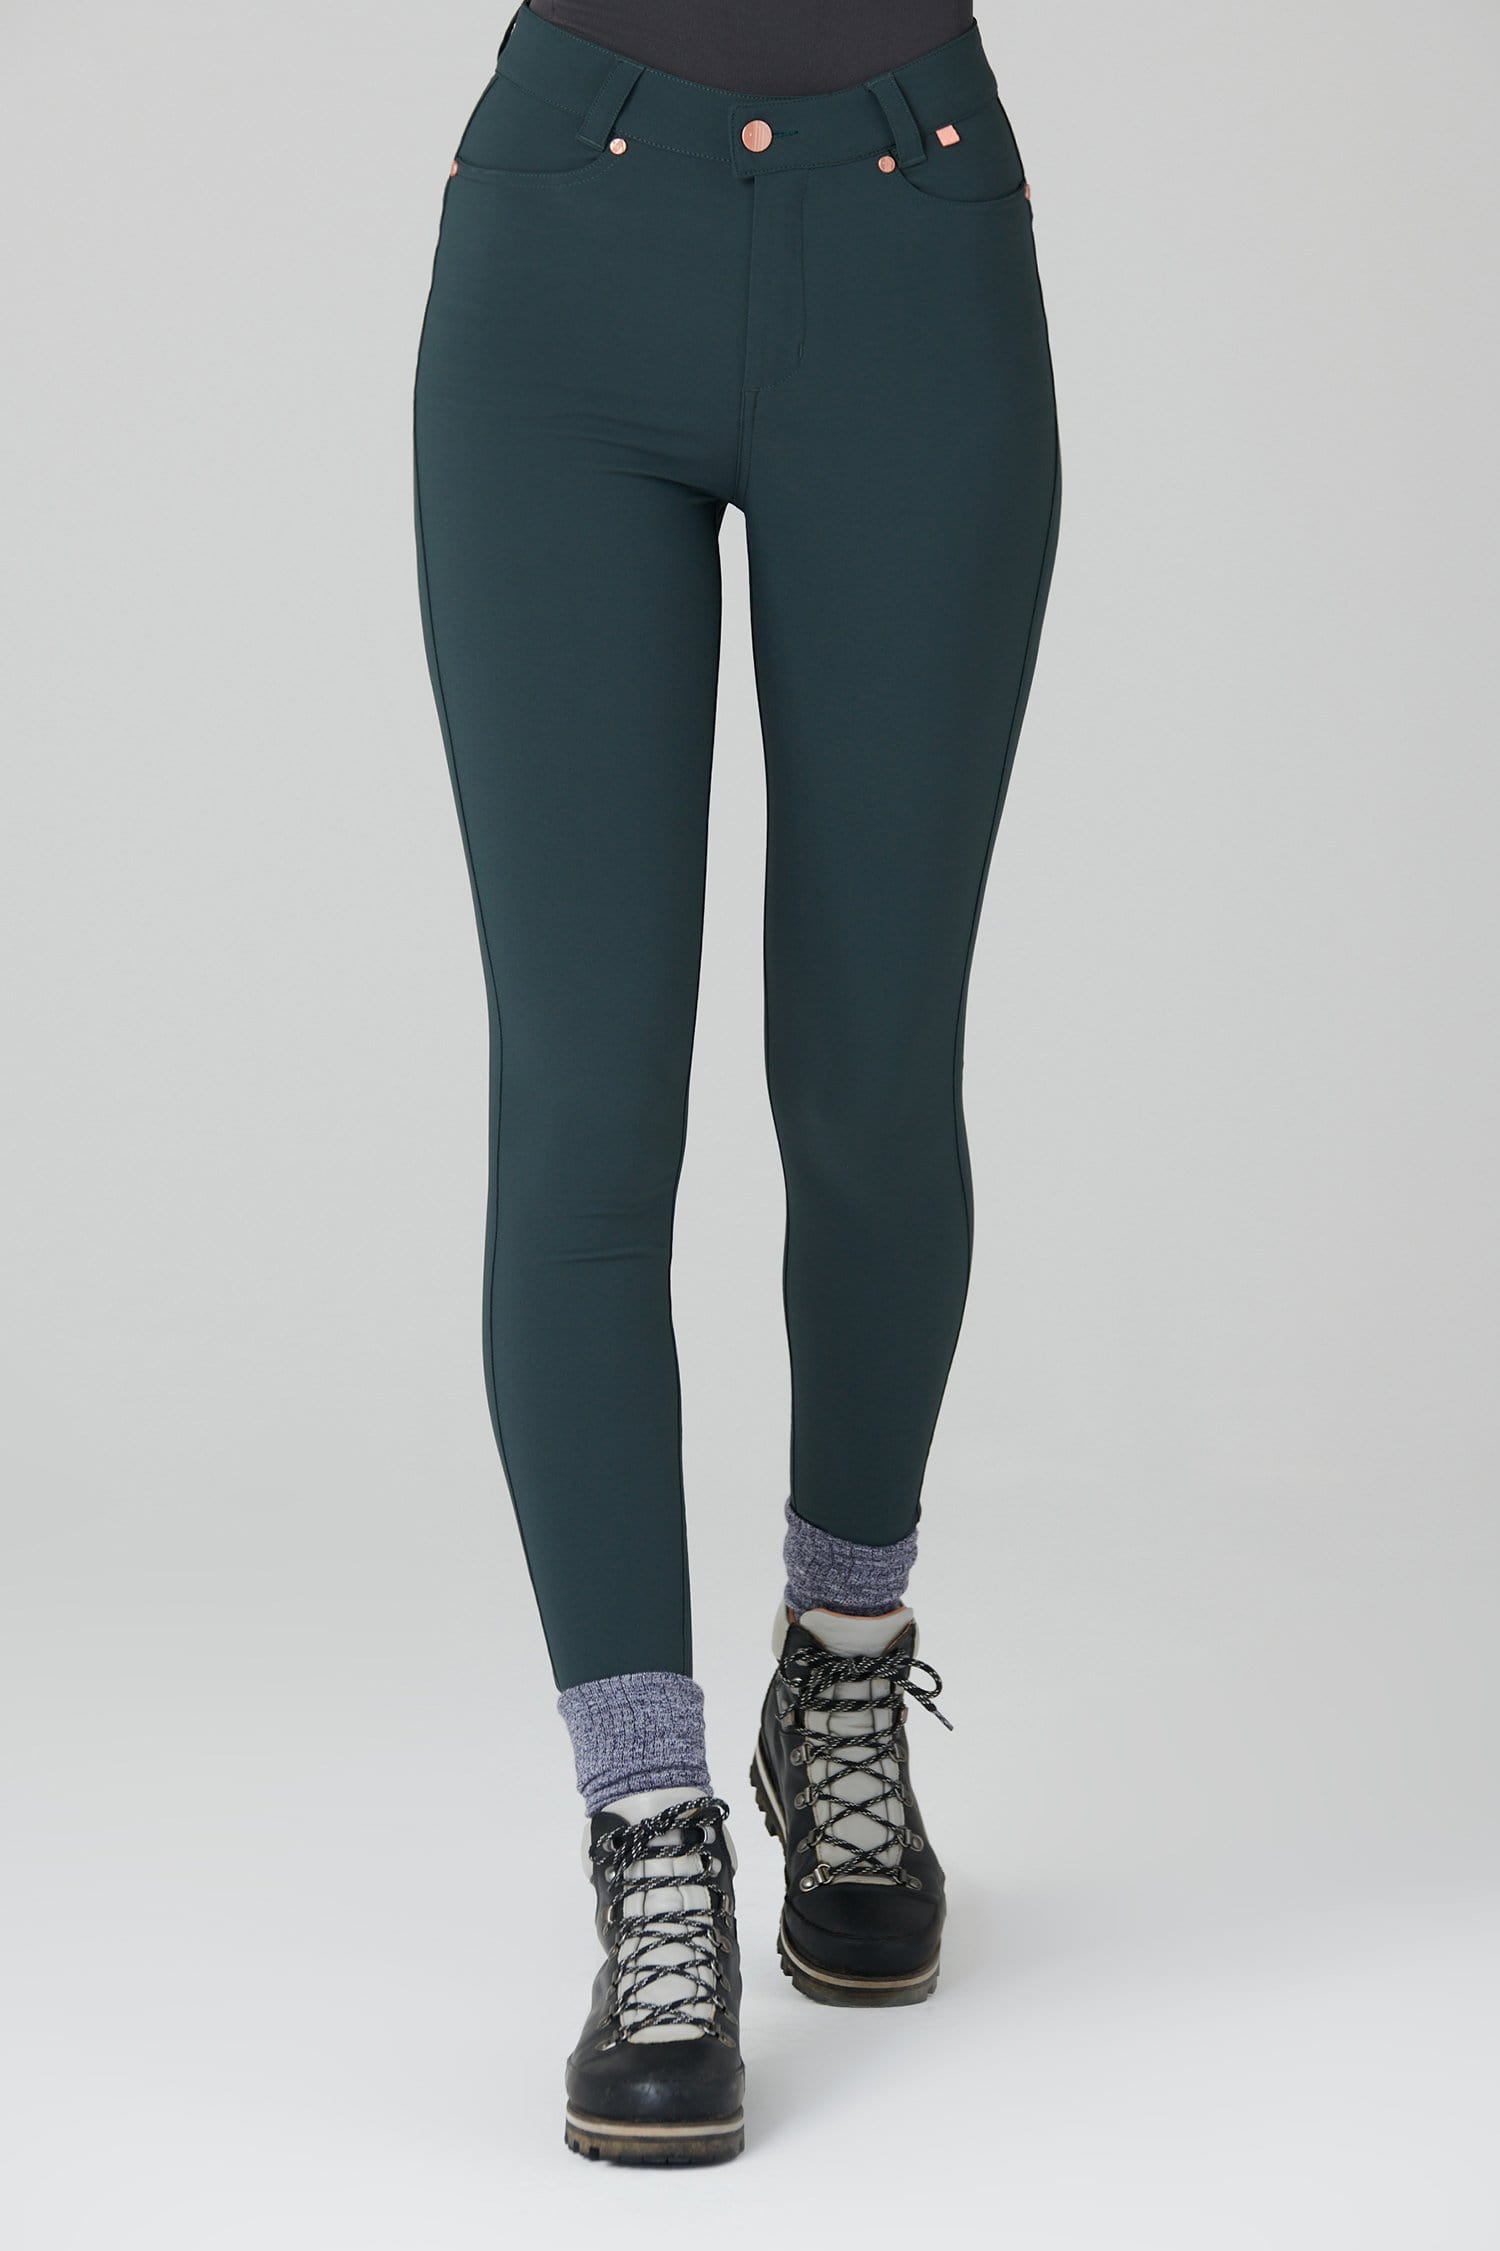 Thermal Skinny Outdoor Trousers - Forest Green - 34p / Uk16 - Womens - Acai Outdoorwear